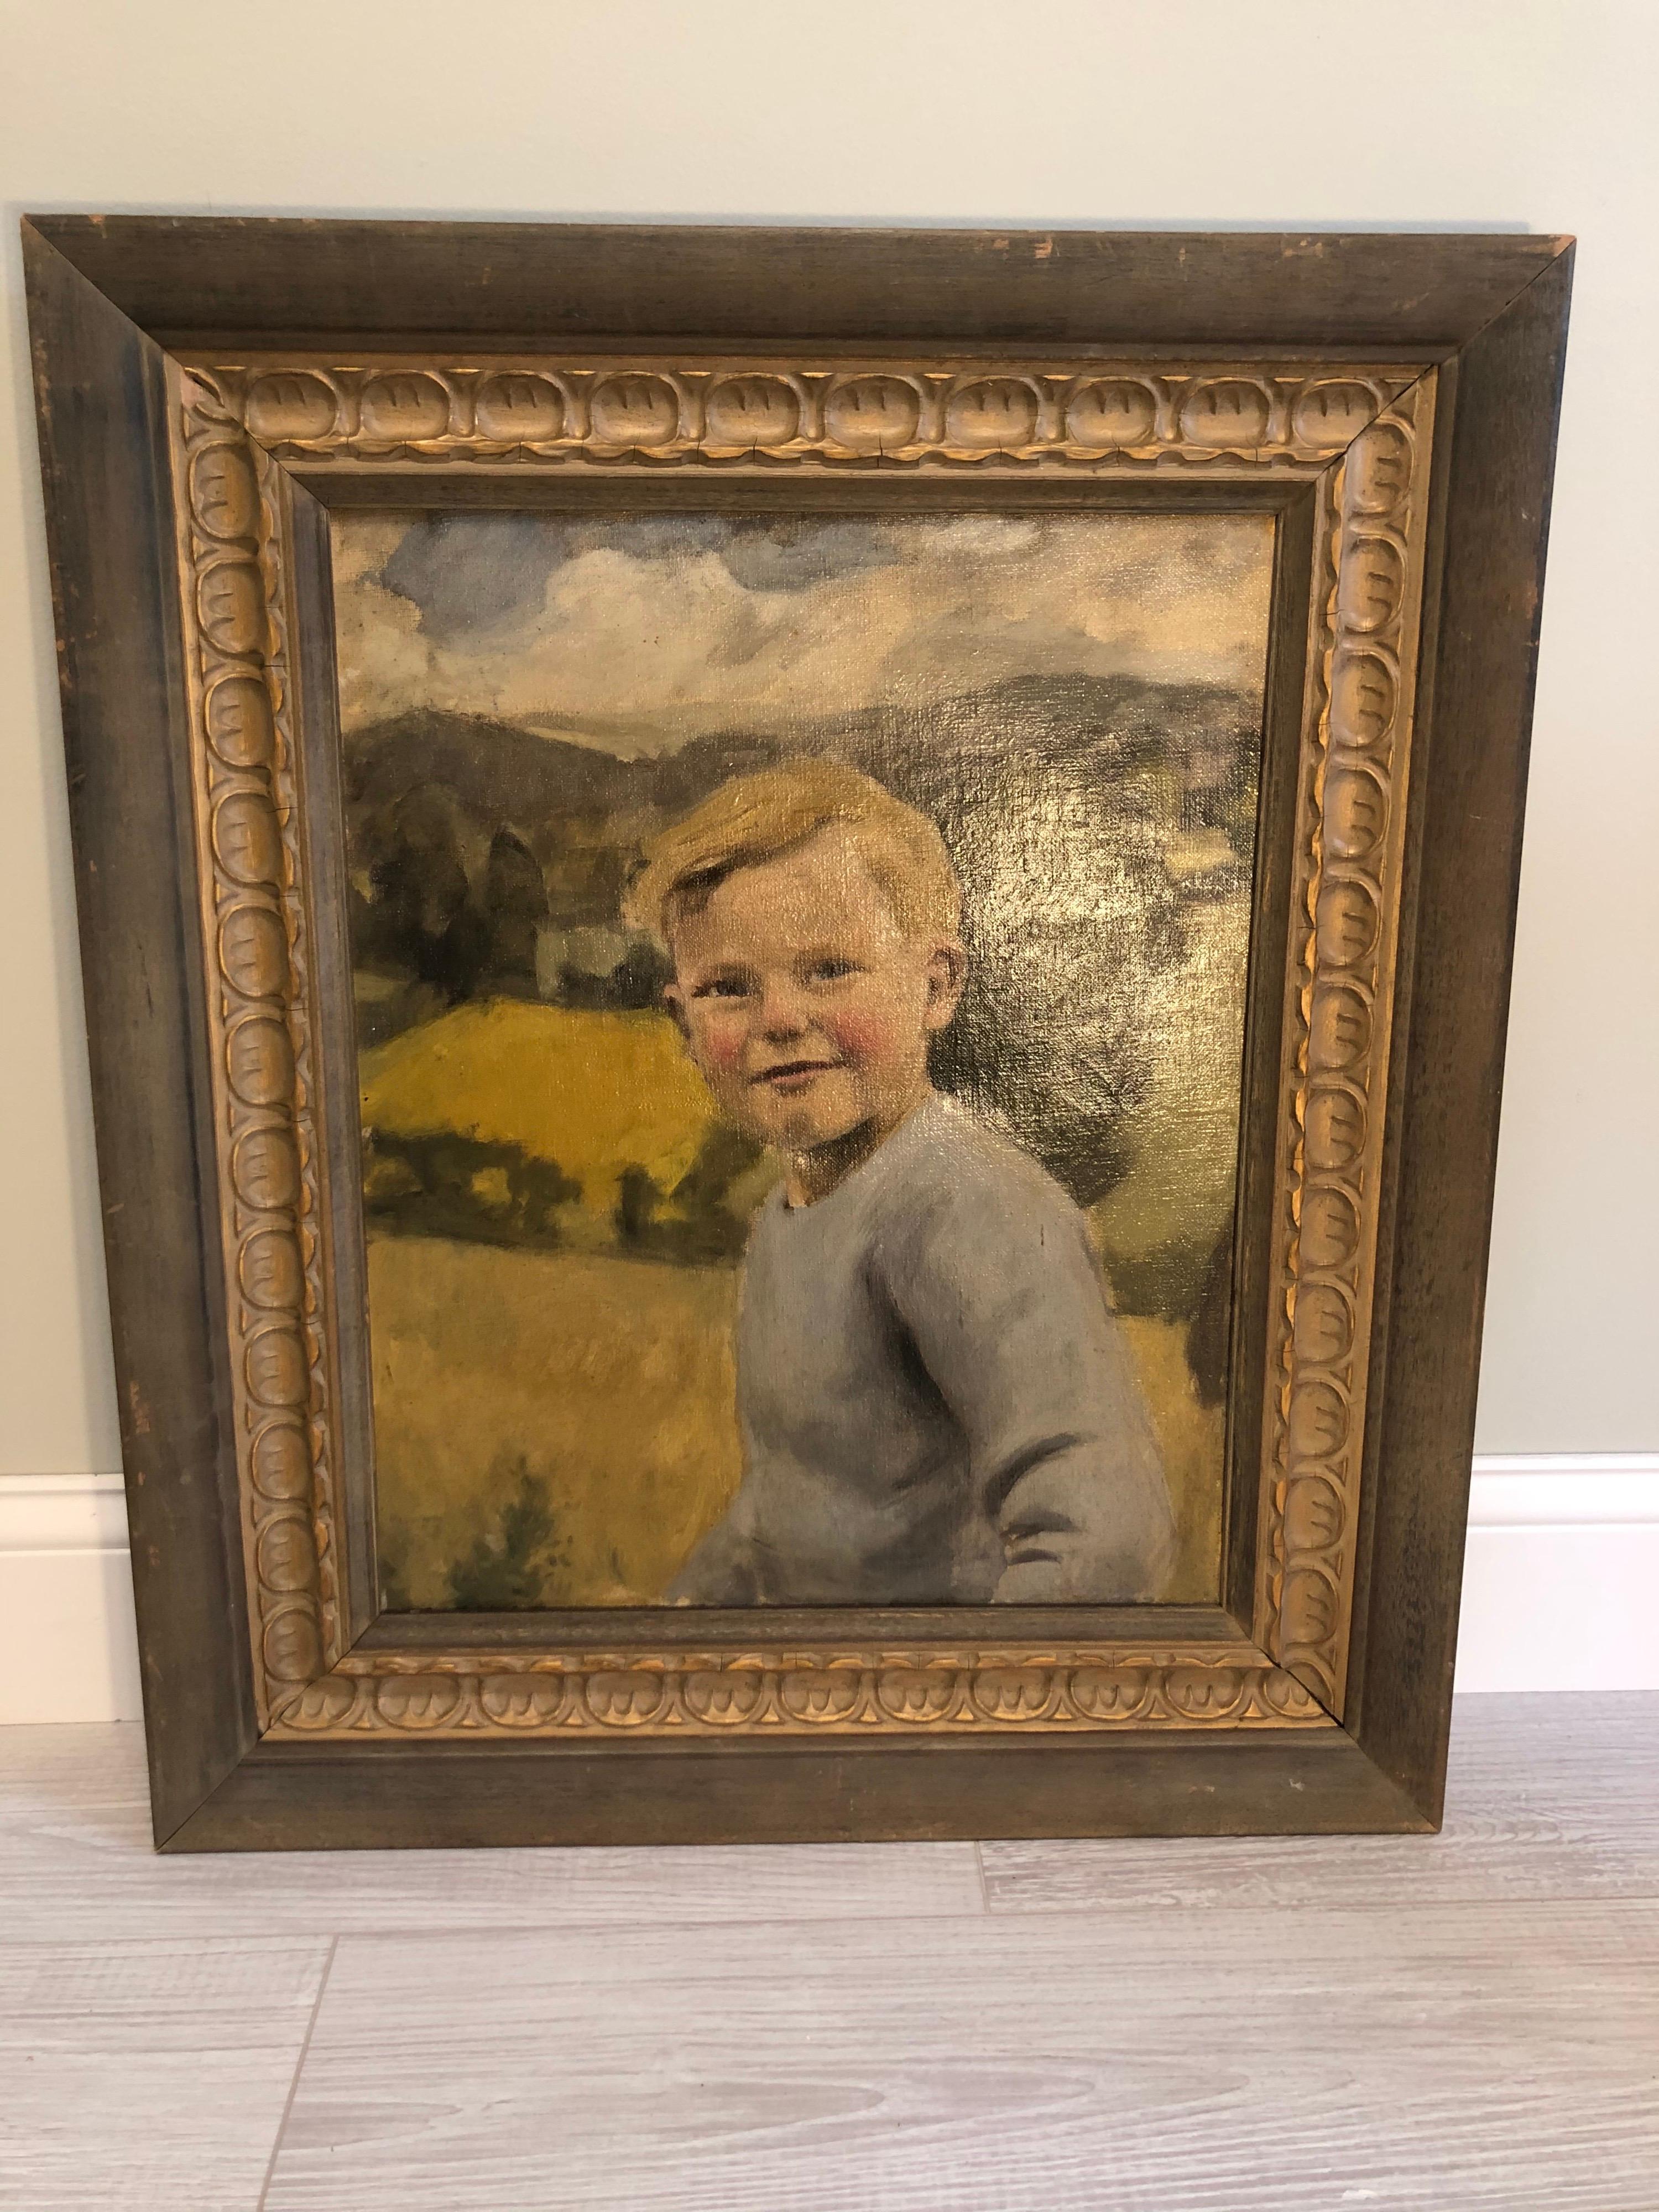 Oil on Canvas of German or Swiss Alps youth circa 1930's. This infectious youth is all smiles and happy to be outside near some mountaintop. Nice clean painting with great artistic technique. Dramatically frames in solid wooden frame of gray and